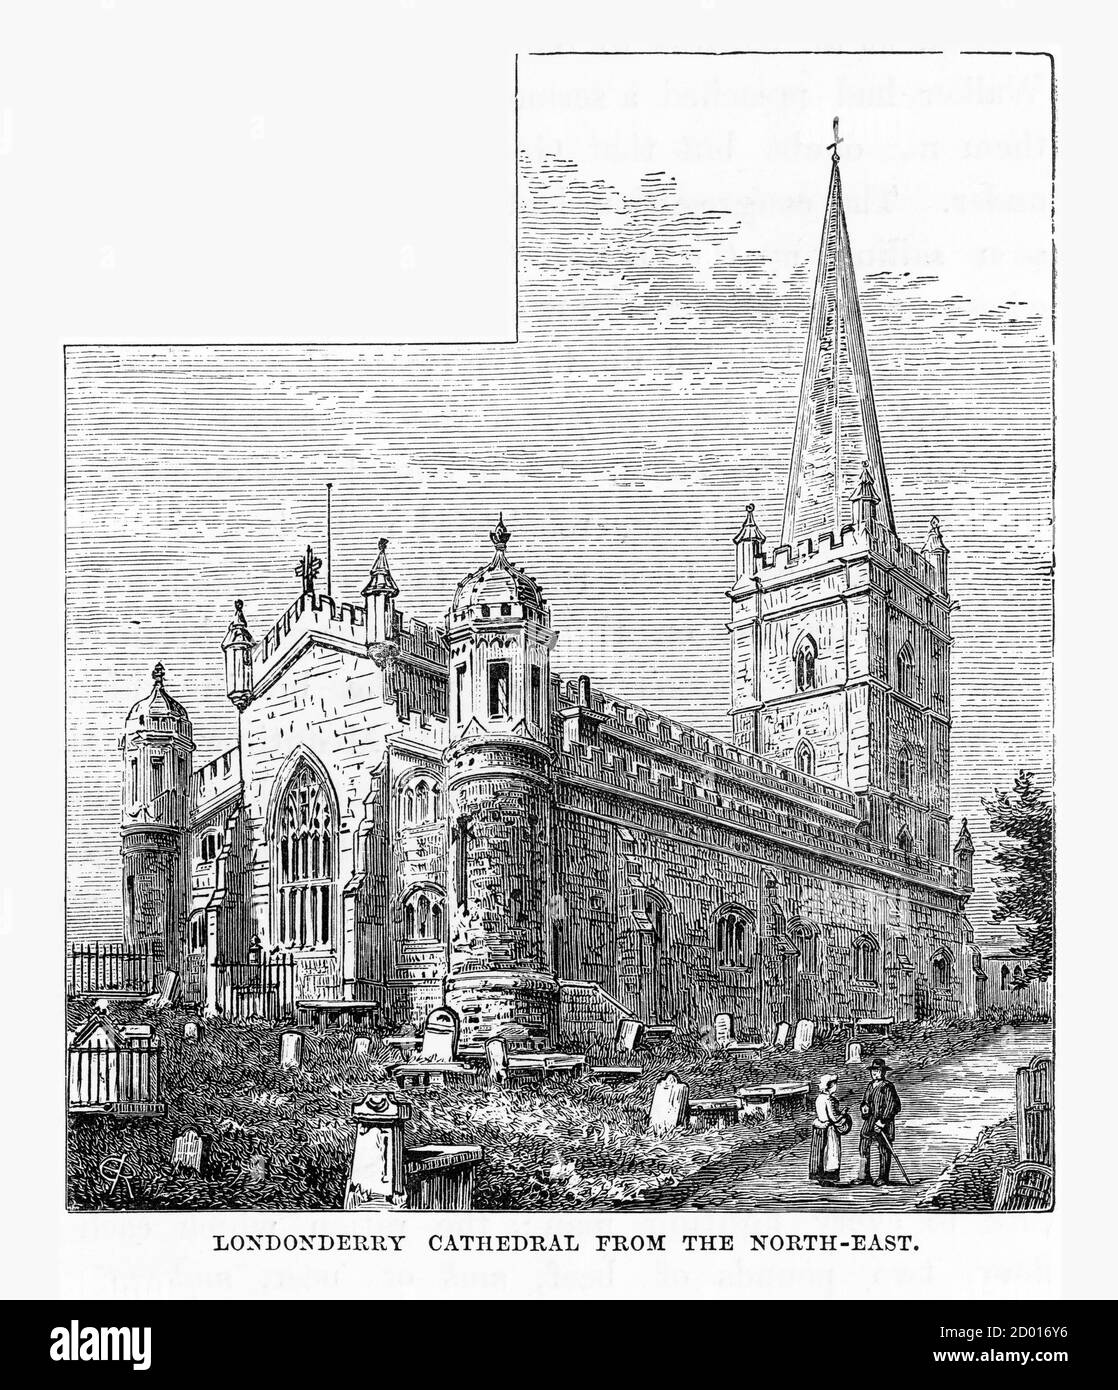 Londonderry Cathedral, Londonderry, Derry, Donegal, Nordirland, Victorian Engraving, 1840 Stockfoto